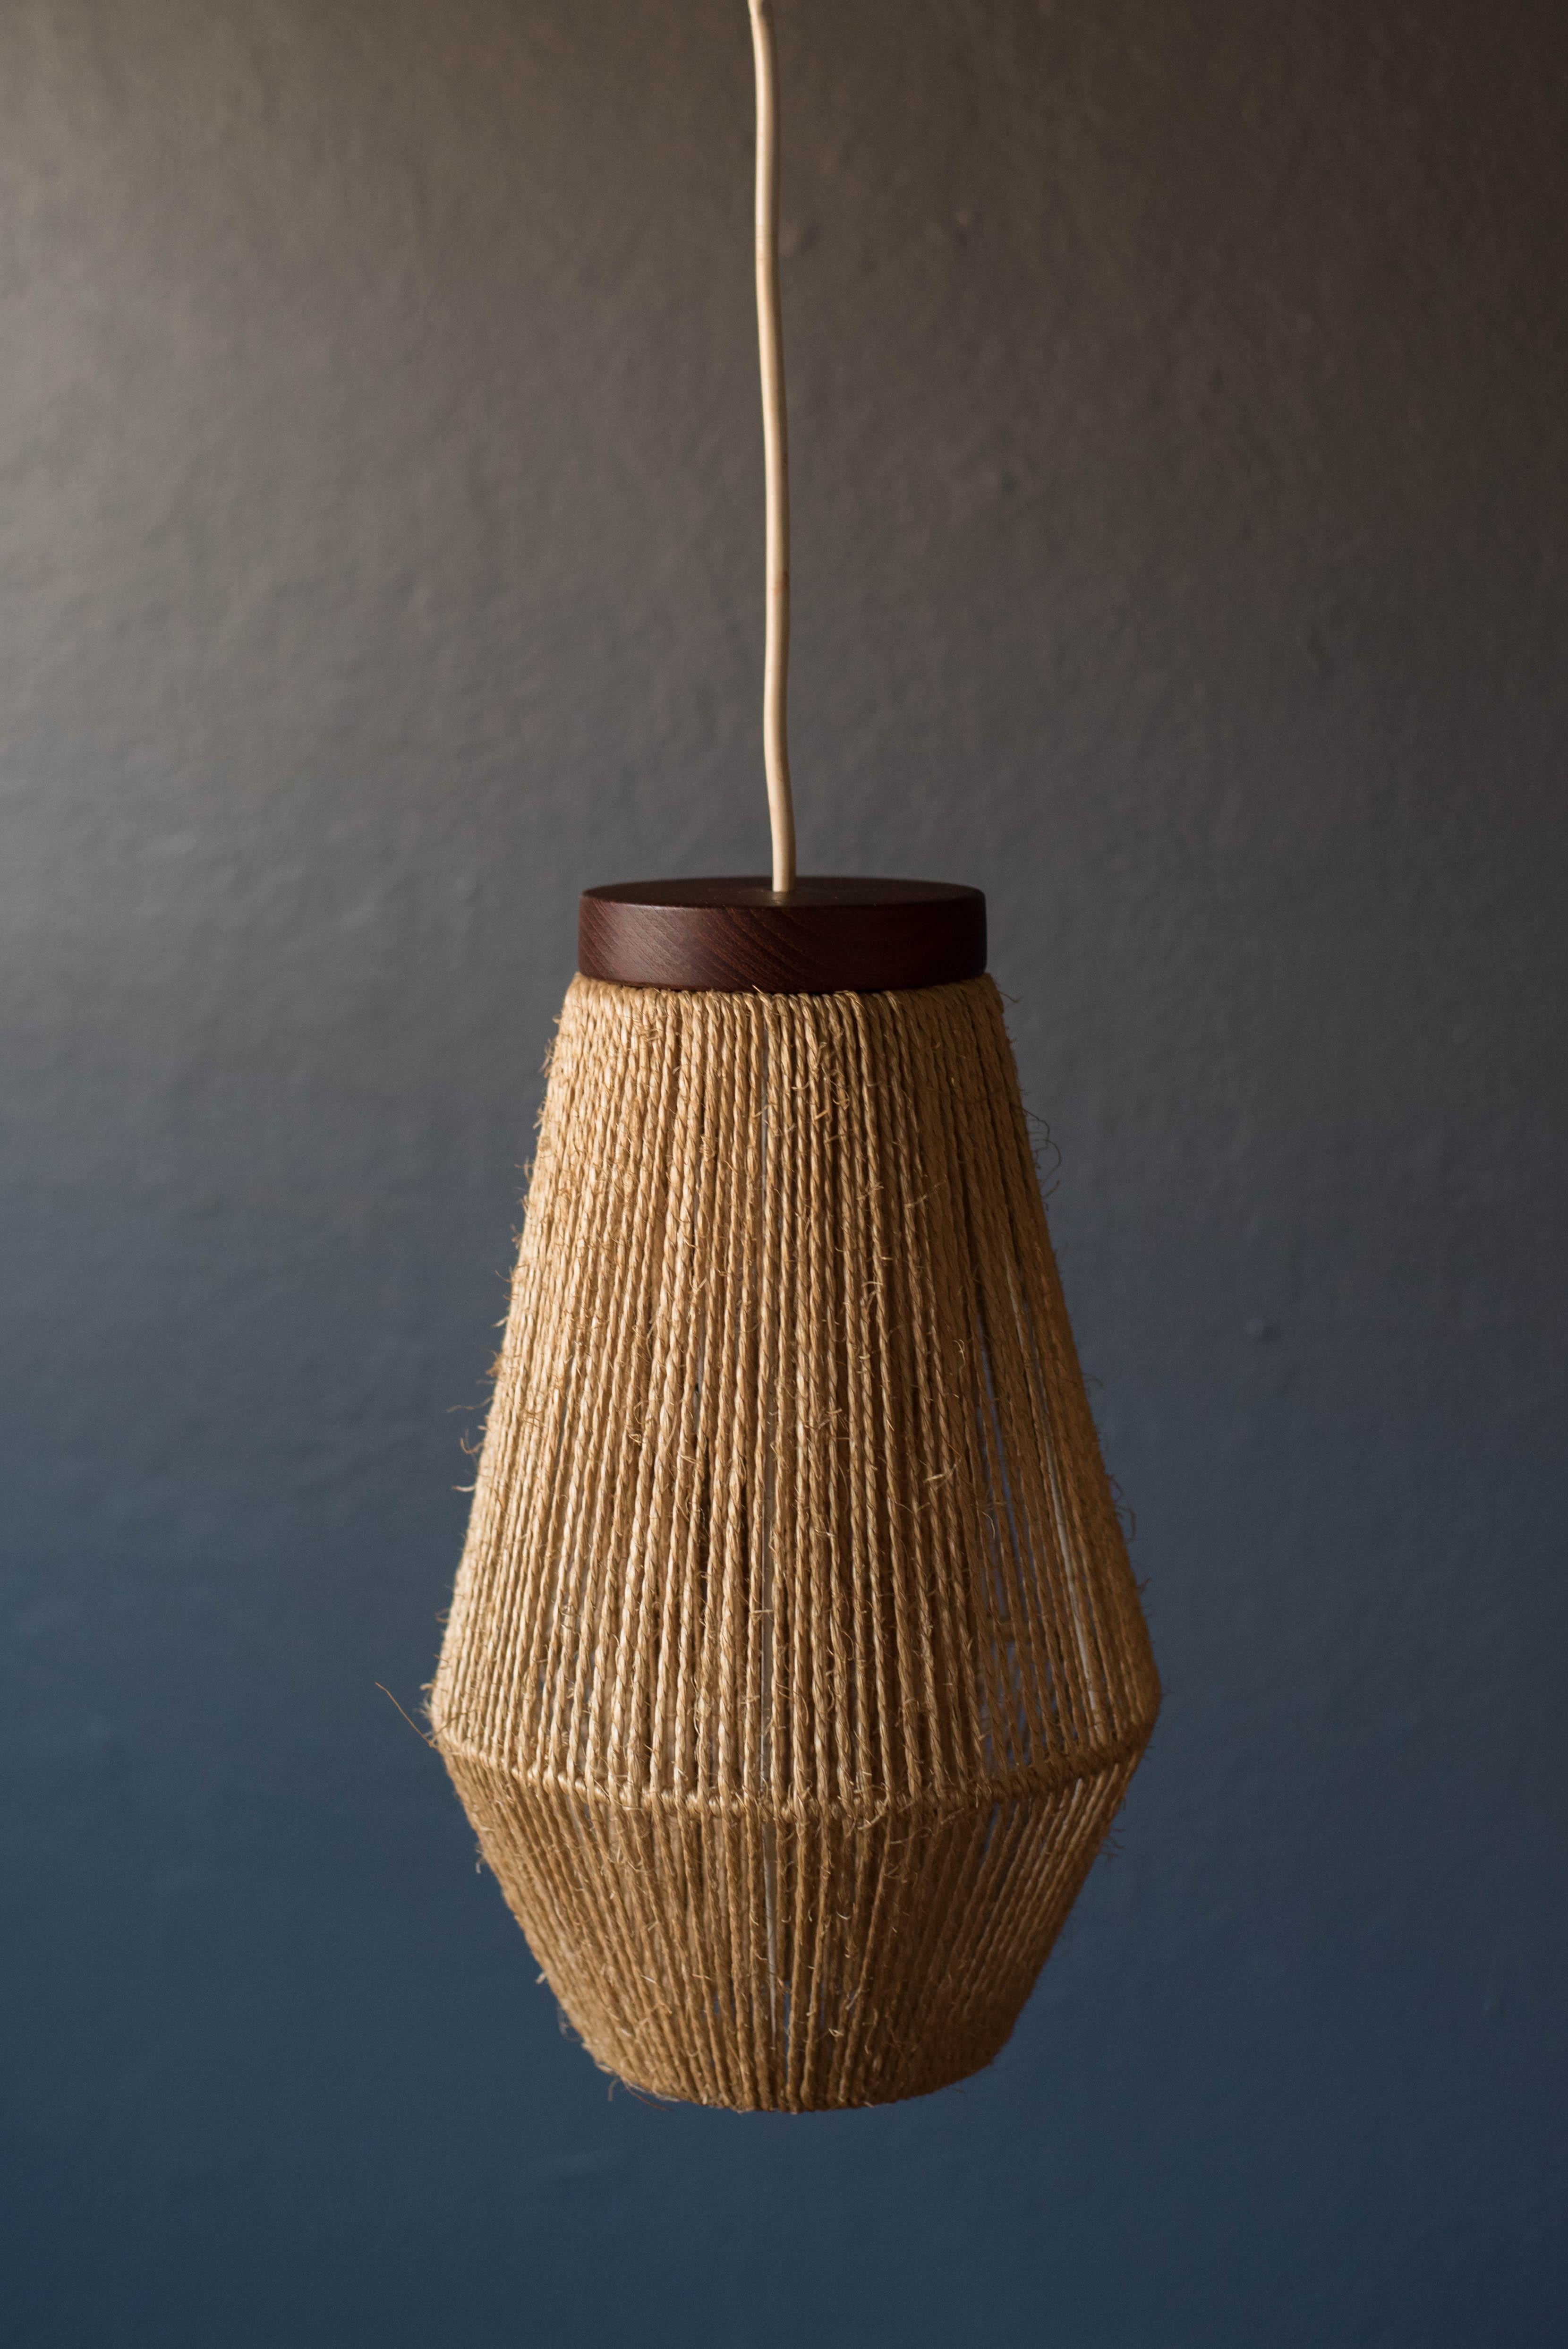 Mid-Century Modern hanging pendant light designed by Ib Fabiansen for Fog and Morup, circa 1960s. This piece displays a unique symmetrical shape wrapped in natural sisal fibers accented in teak.




Offered by Mid Century Maddist